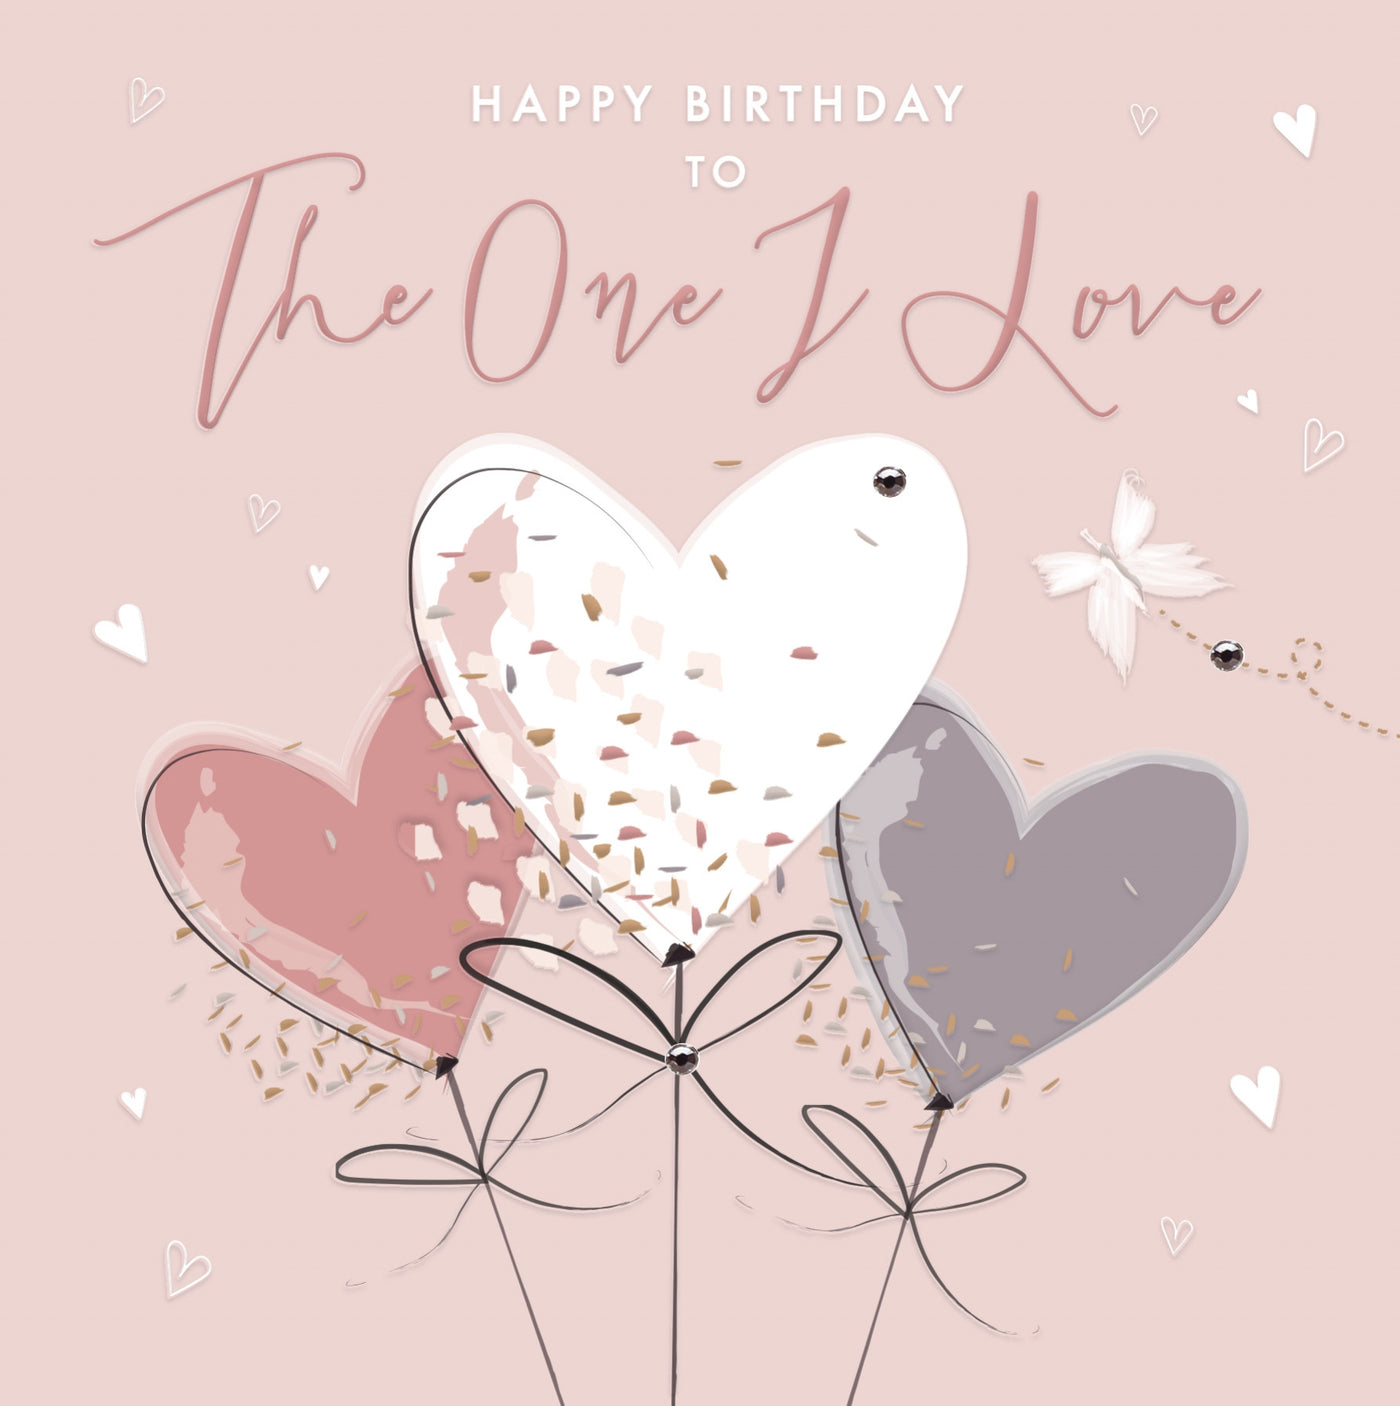 The Handcrafted Card Company To the One I Love 3 Balloons Birthday Card